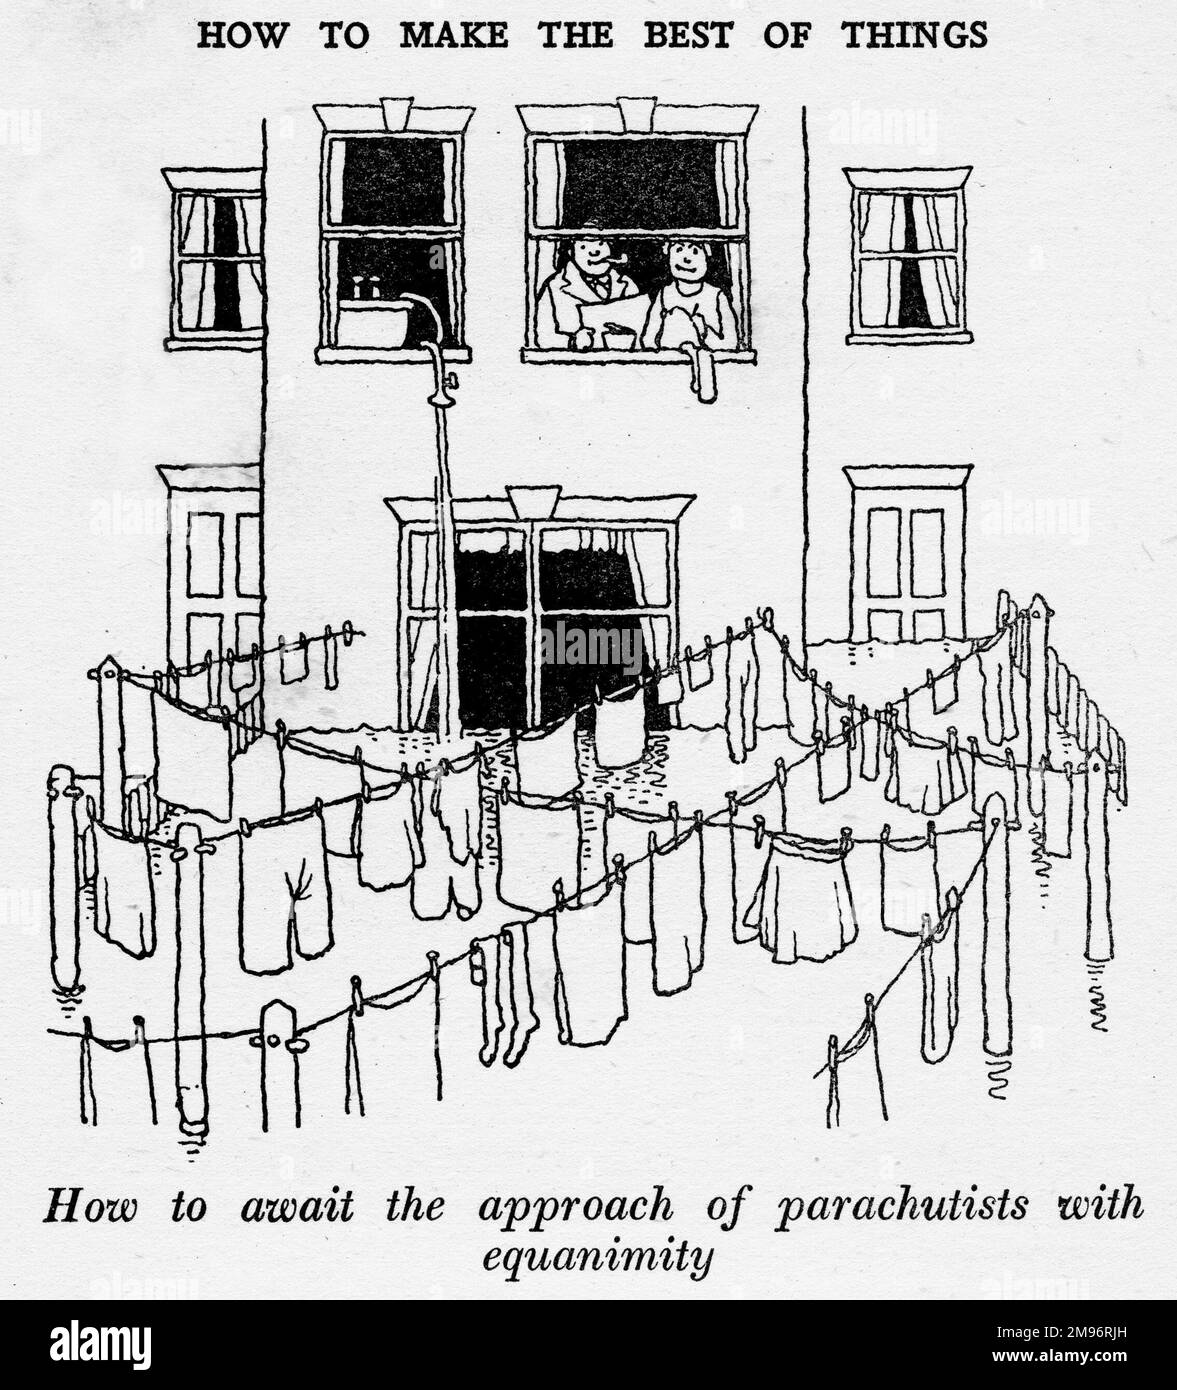 Heath Robinson - Wartime Cartoons - WWII.  How to await the approach of parachutists with equanimity. Stock Photo